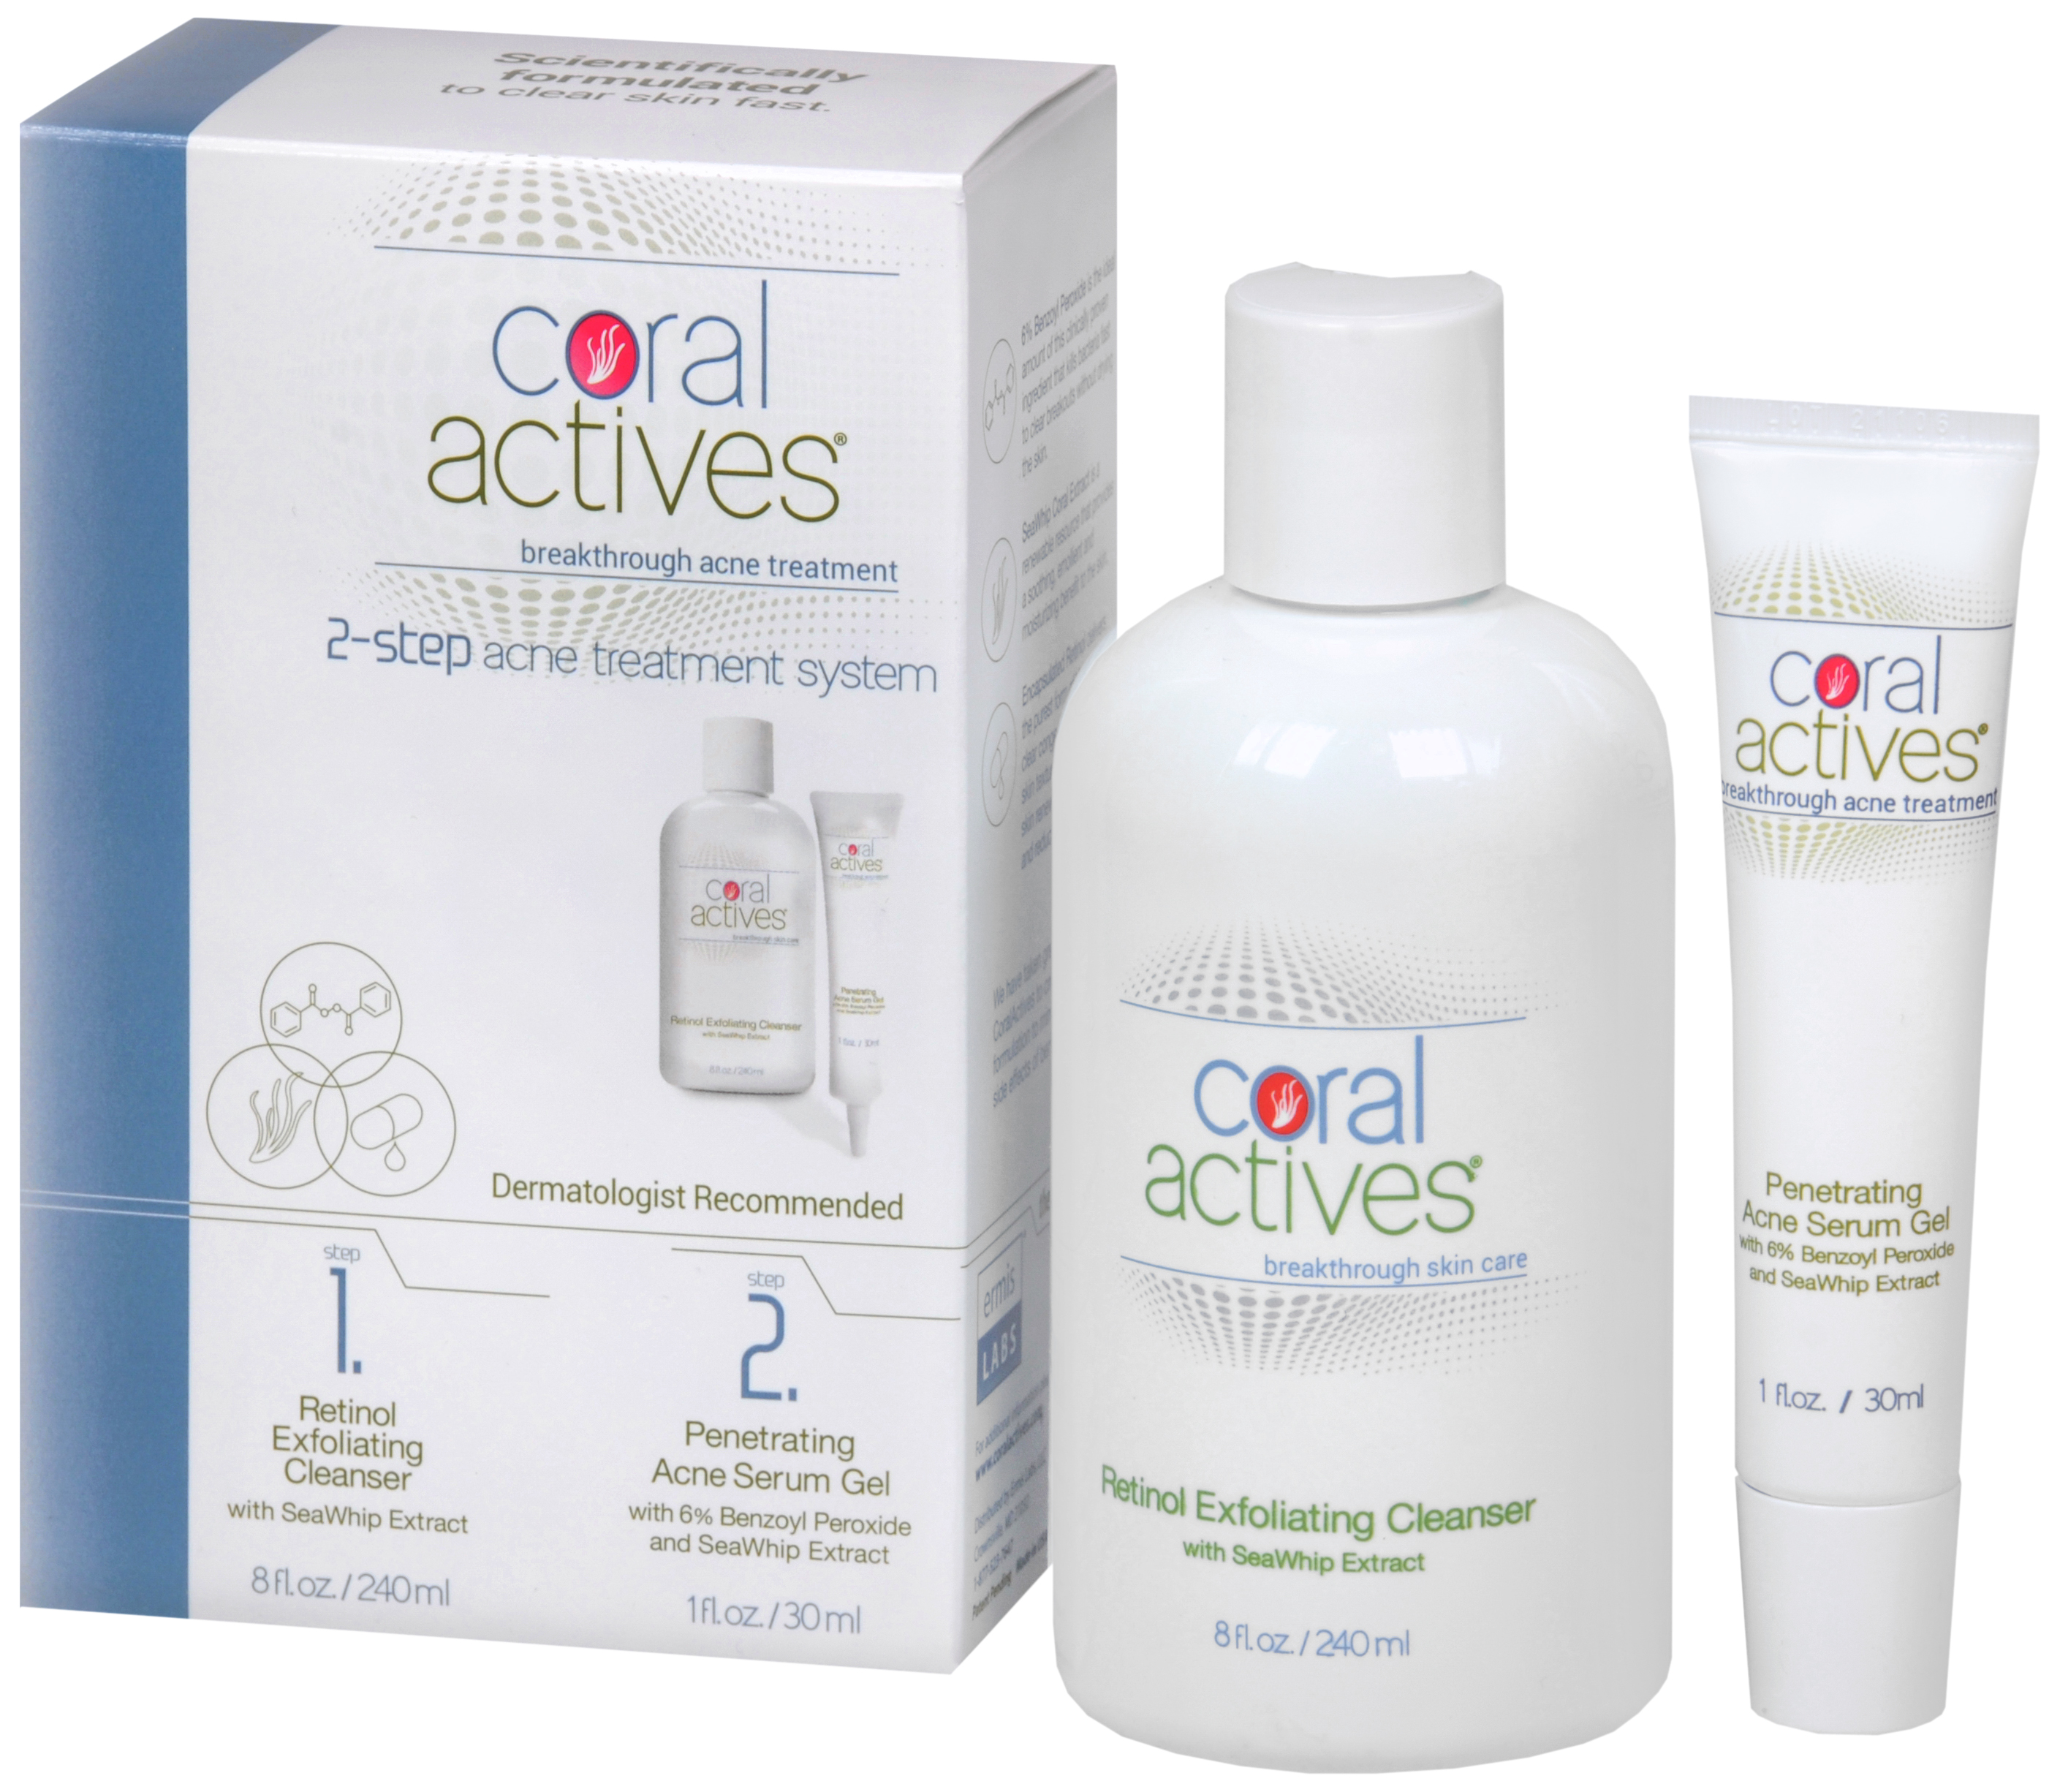 CoralActives Acne Treatment System